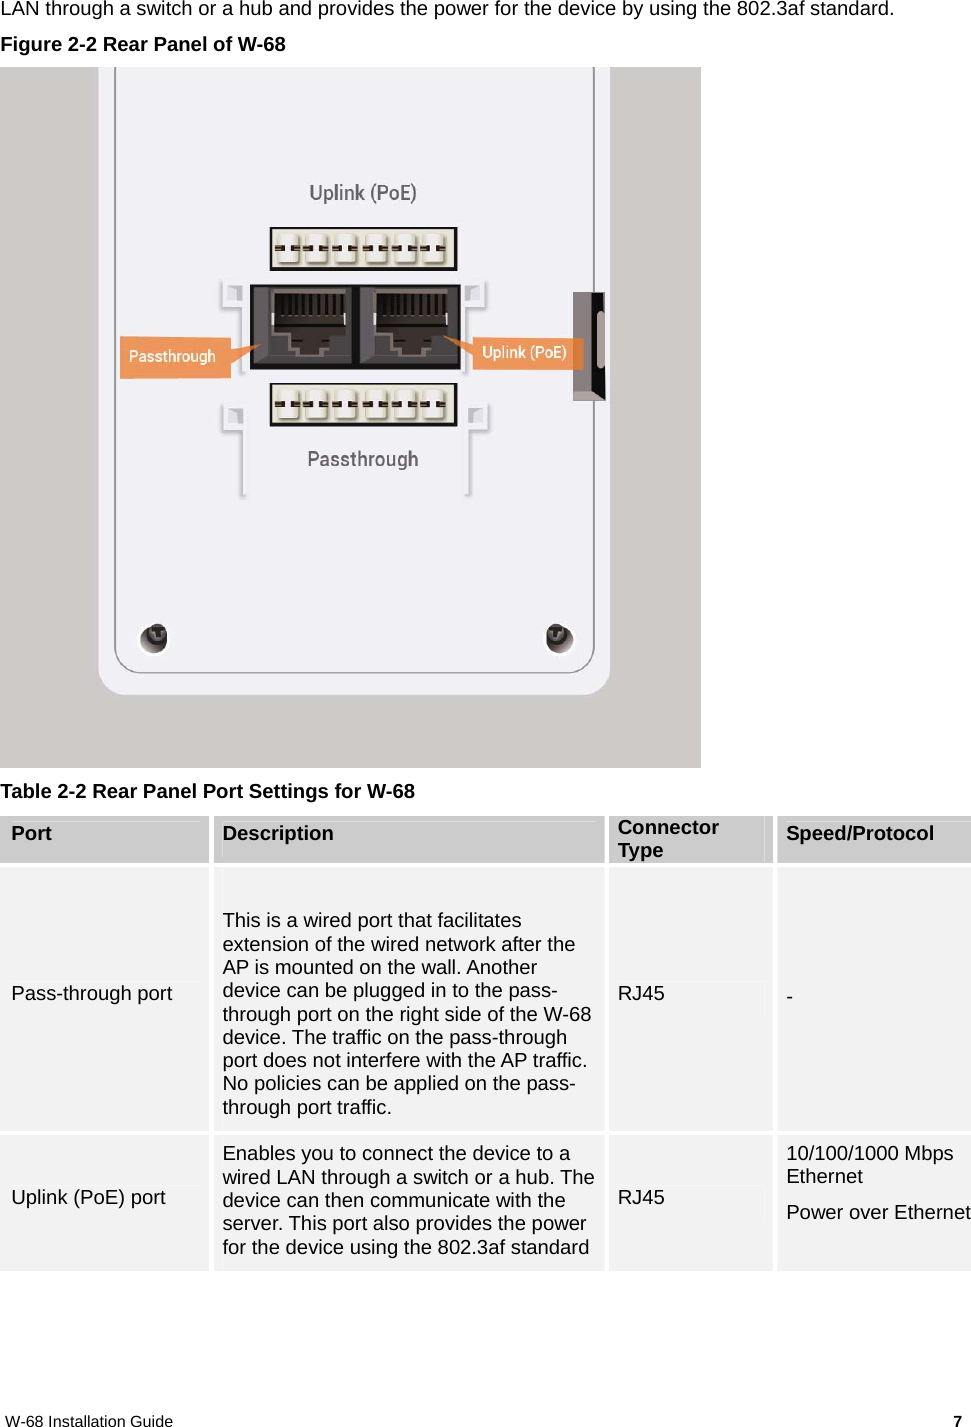 W-68 Installation Guide     7 LAN through a switch or a hub and provides the power for the device by using the 802.3af standard. Figure 2-2 Rear Panel of W-68  Table 2-2 Rear Panel Port Settings for W-68 Port  Description  Connector Type  Speed/Protocol Pass-through port  This is a wired port that facilitates extension of the wired network after the AP is mounted on the wall. Another device can be plugged in to the pass-through port on the right side of the W-68 device. The traffic on the pass-through port does not interfere with the AP traffic. No policies can be applied on the pass-through port traffic.  RJ45  - Uplink (PoE) port Enables you to connect the device to a wired LAN through a switch or a hub. The device can then communicate with the server. This port also provides the power for the device using the 802.3af standardRJ45 10/100/1000 Mbps Ethernet Power over Ethernet   